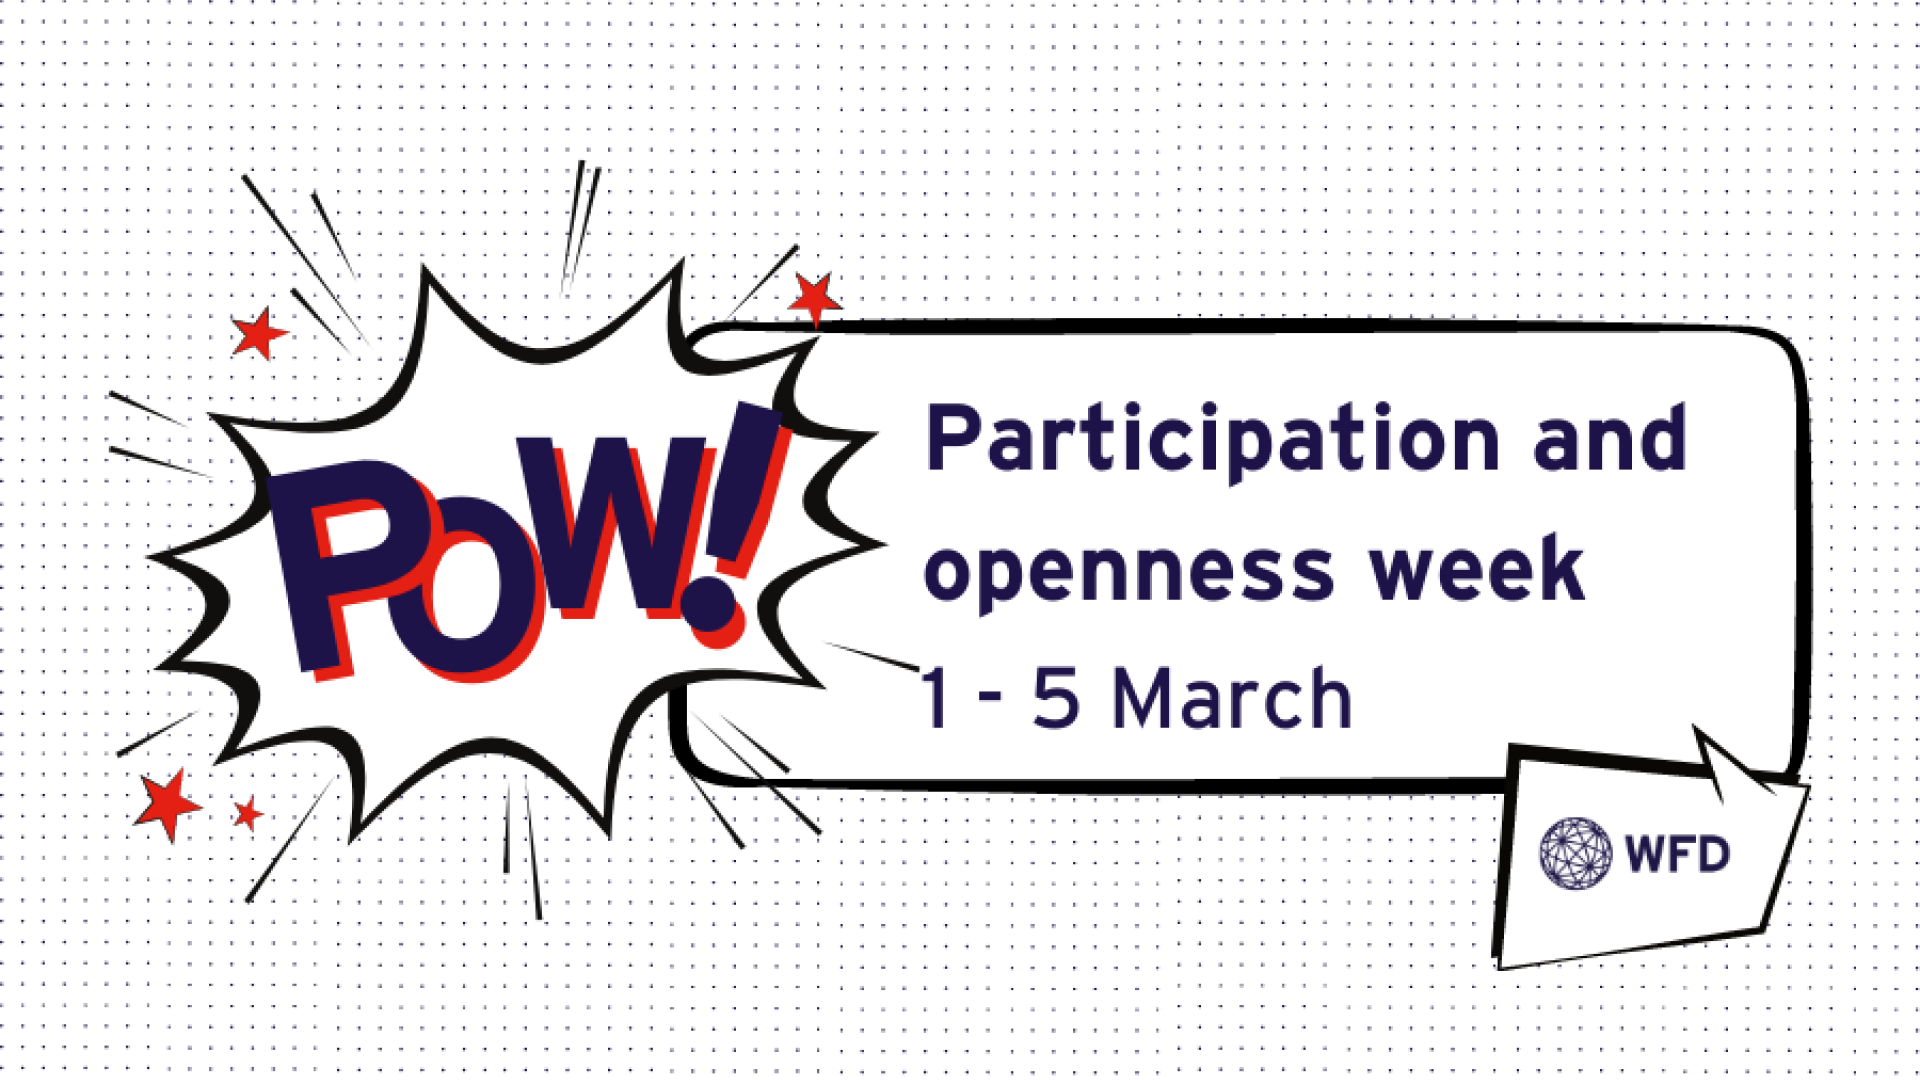 Text reading POW! Participation and openness week 1 -  5 March in a comic book style with the WFD logo